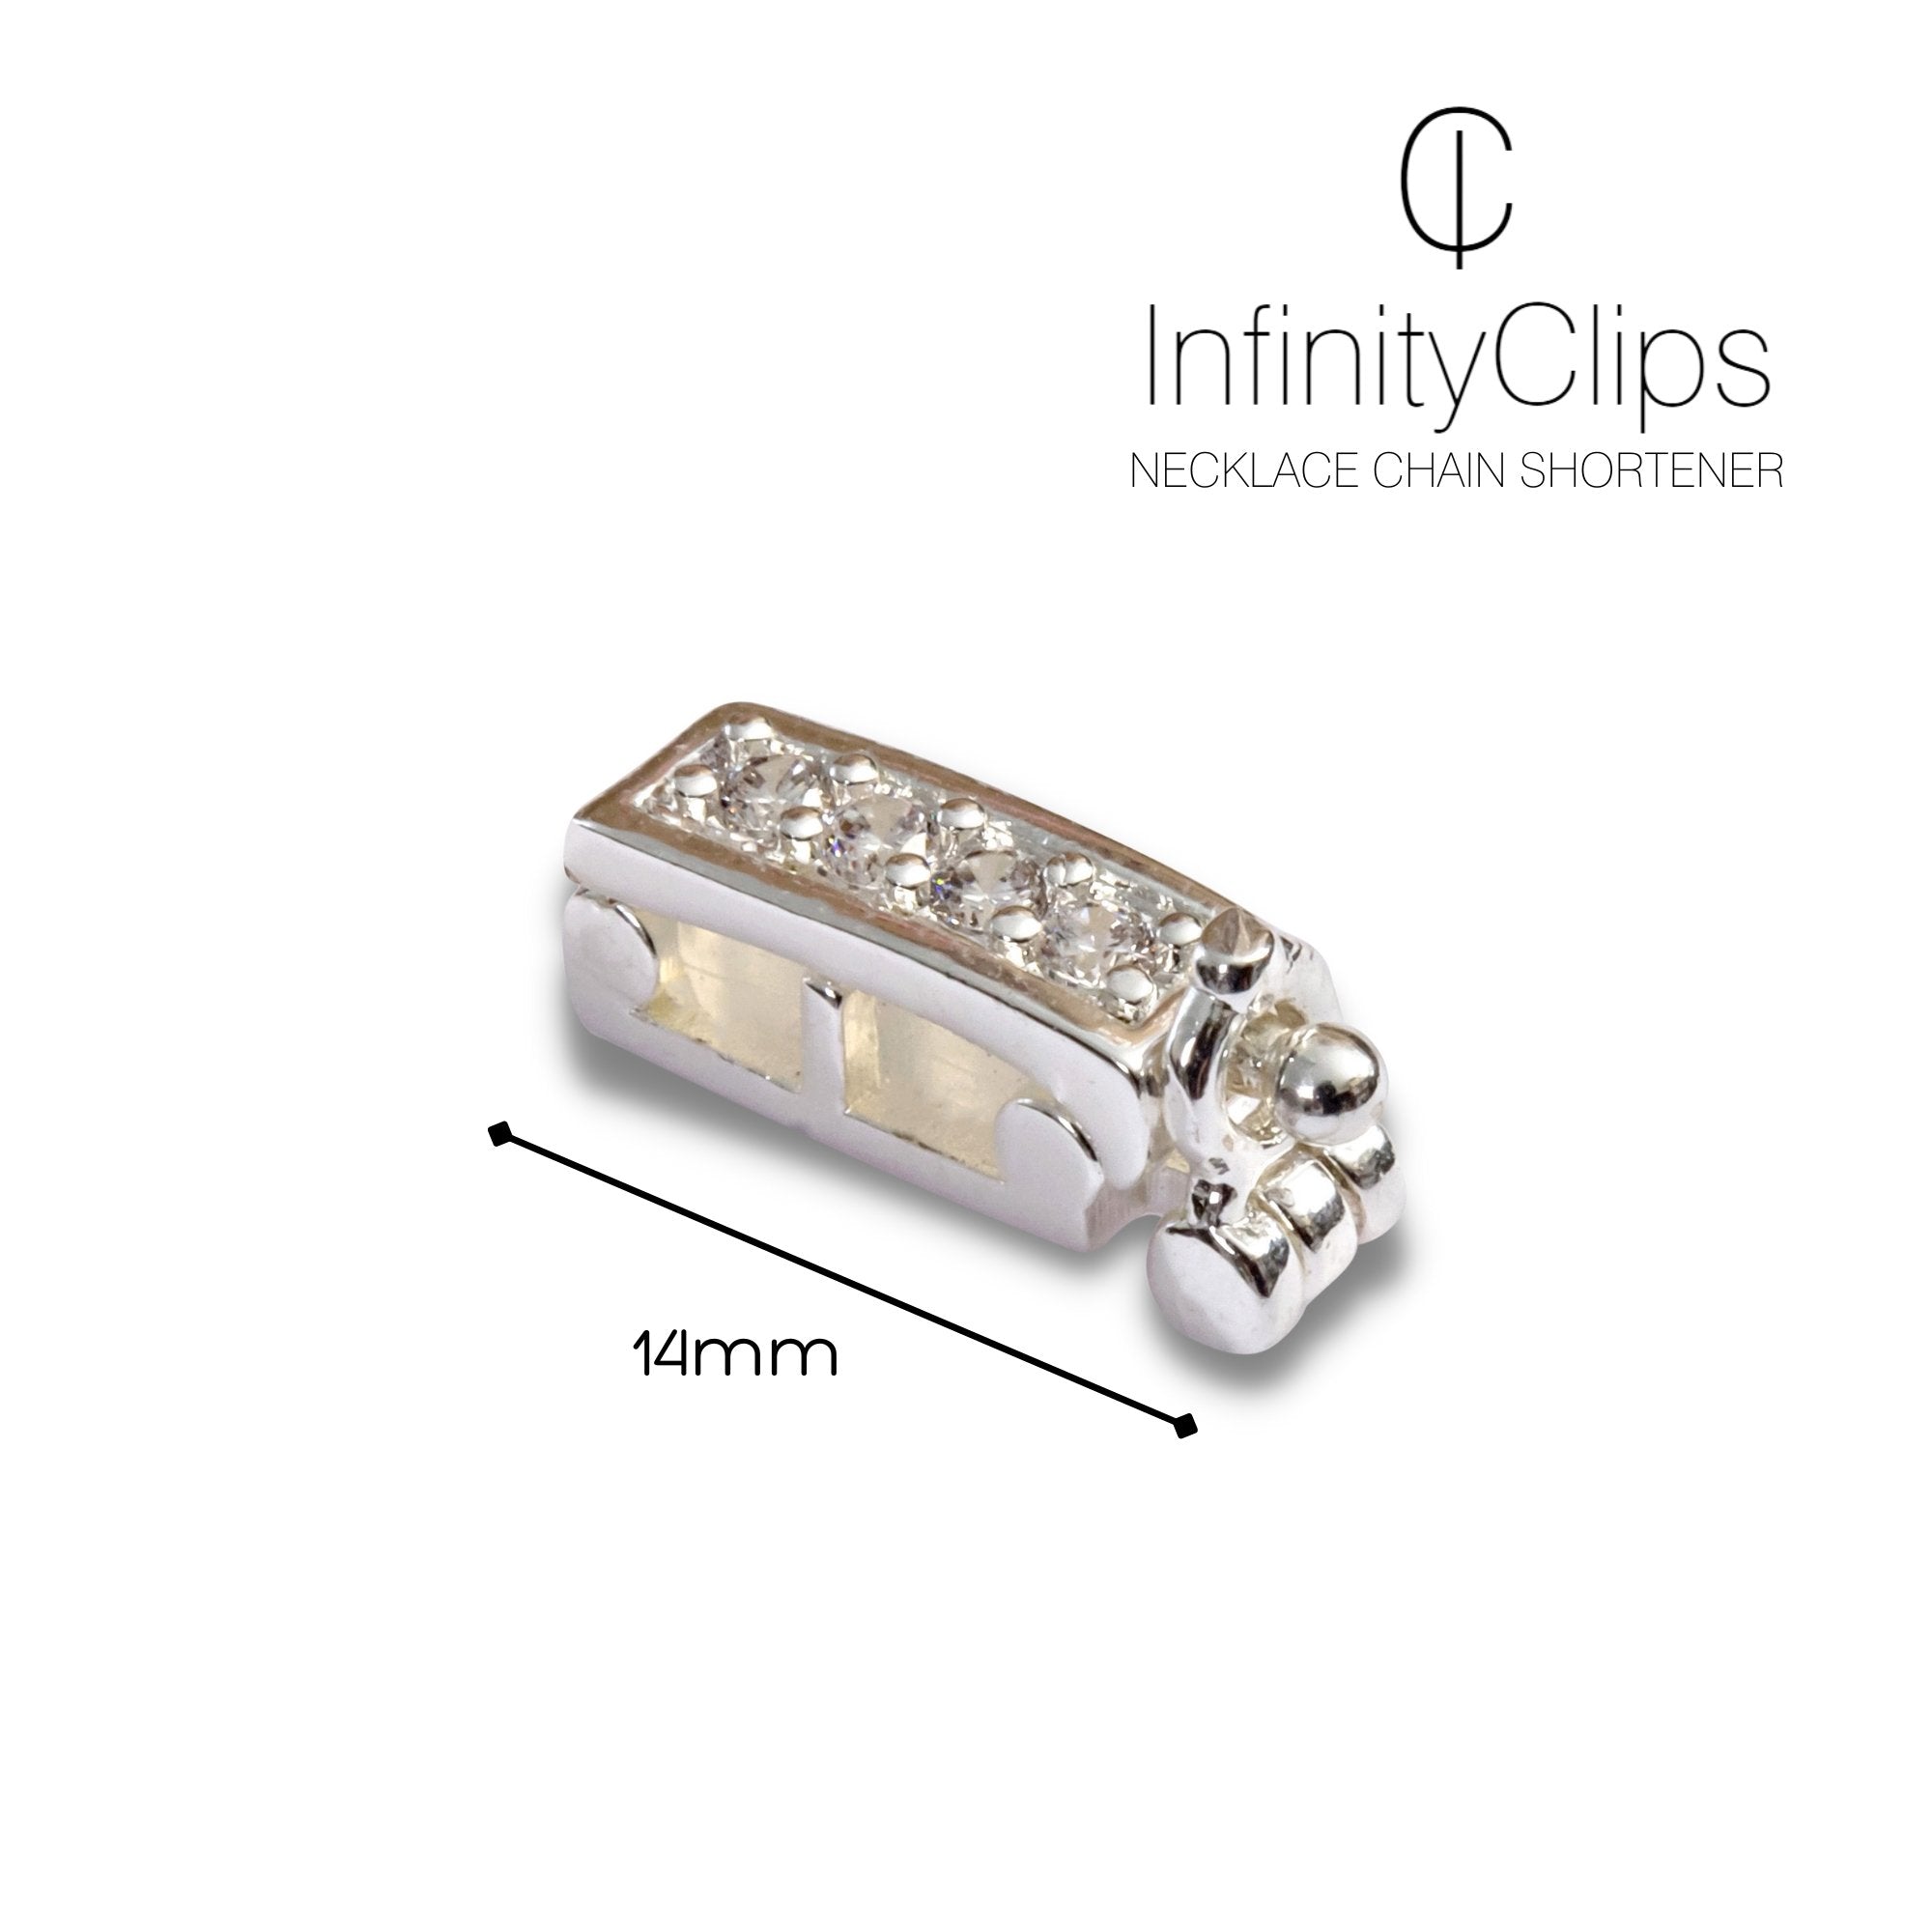 Small Classic Necklace Shortener w/ Clasp (Silver) | InfinityClips